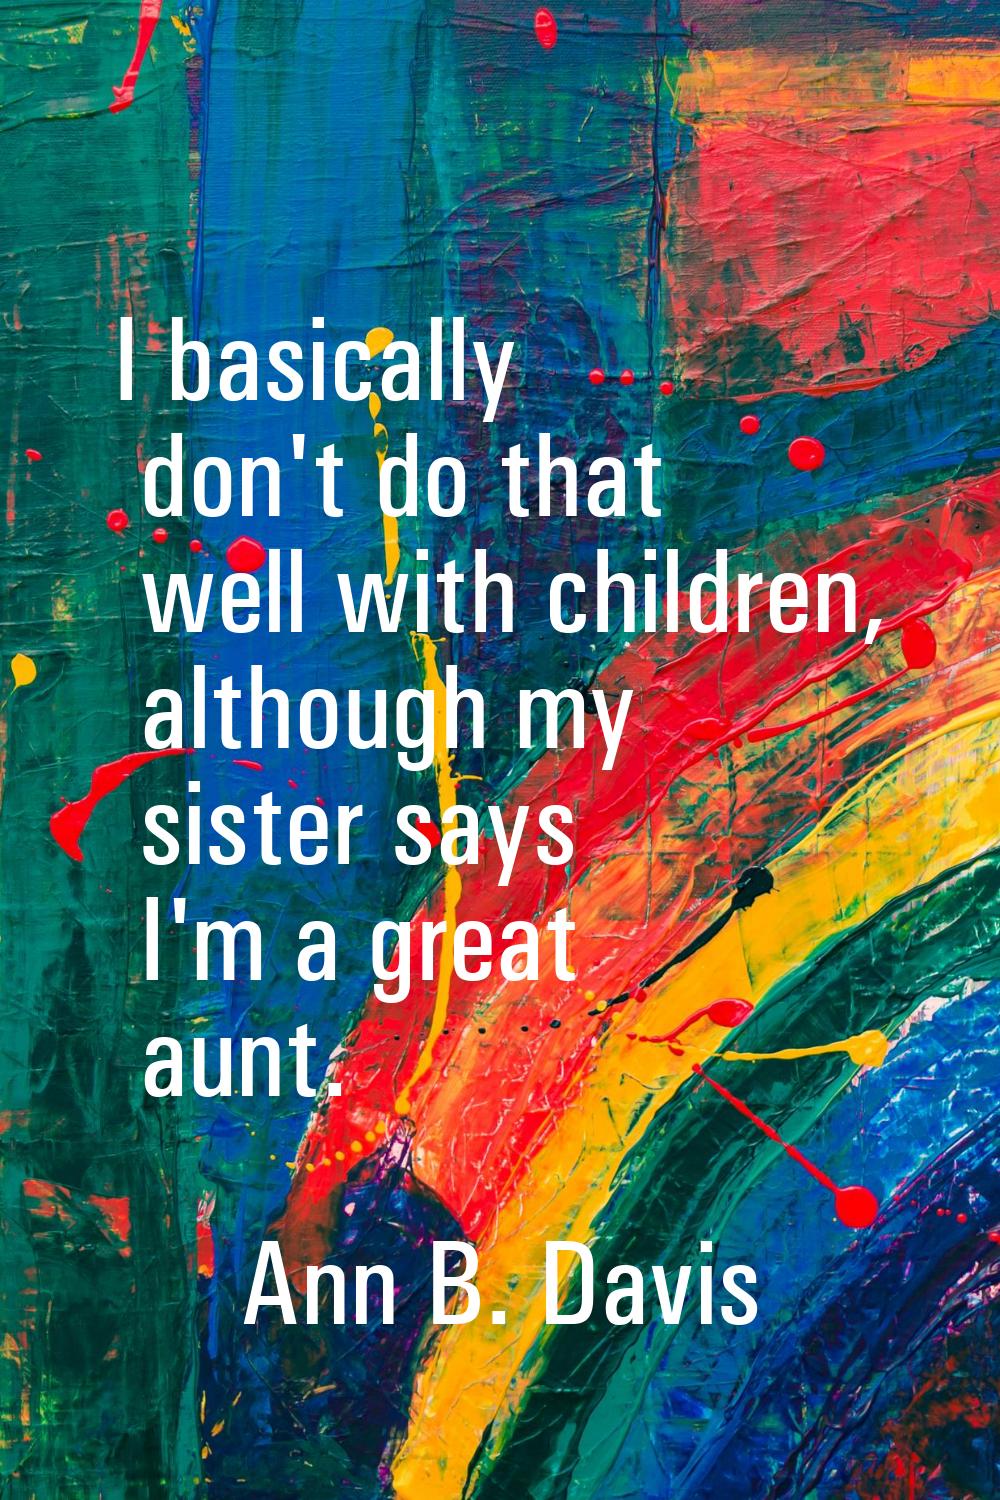 I basically don't do that well with children, although my sister says I'm a great aunt.